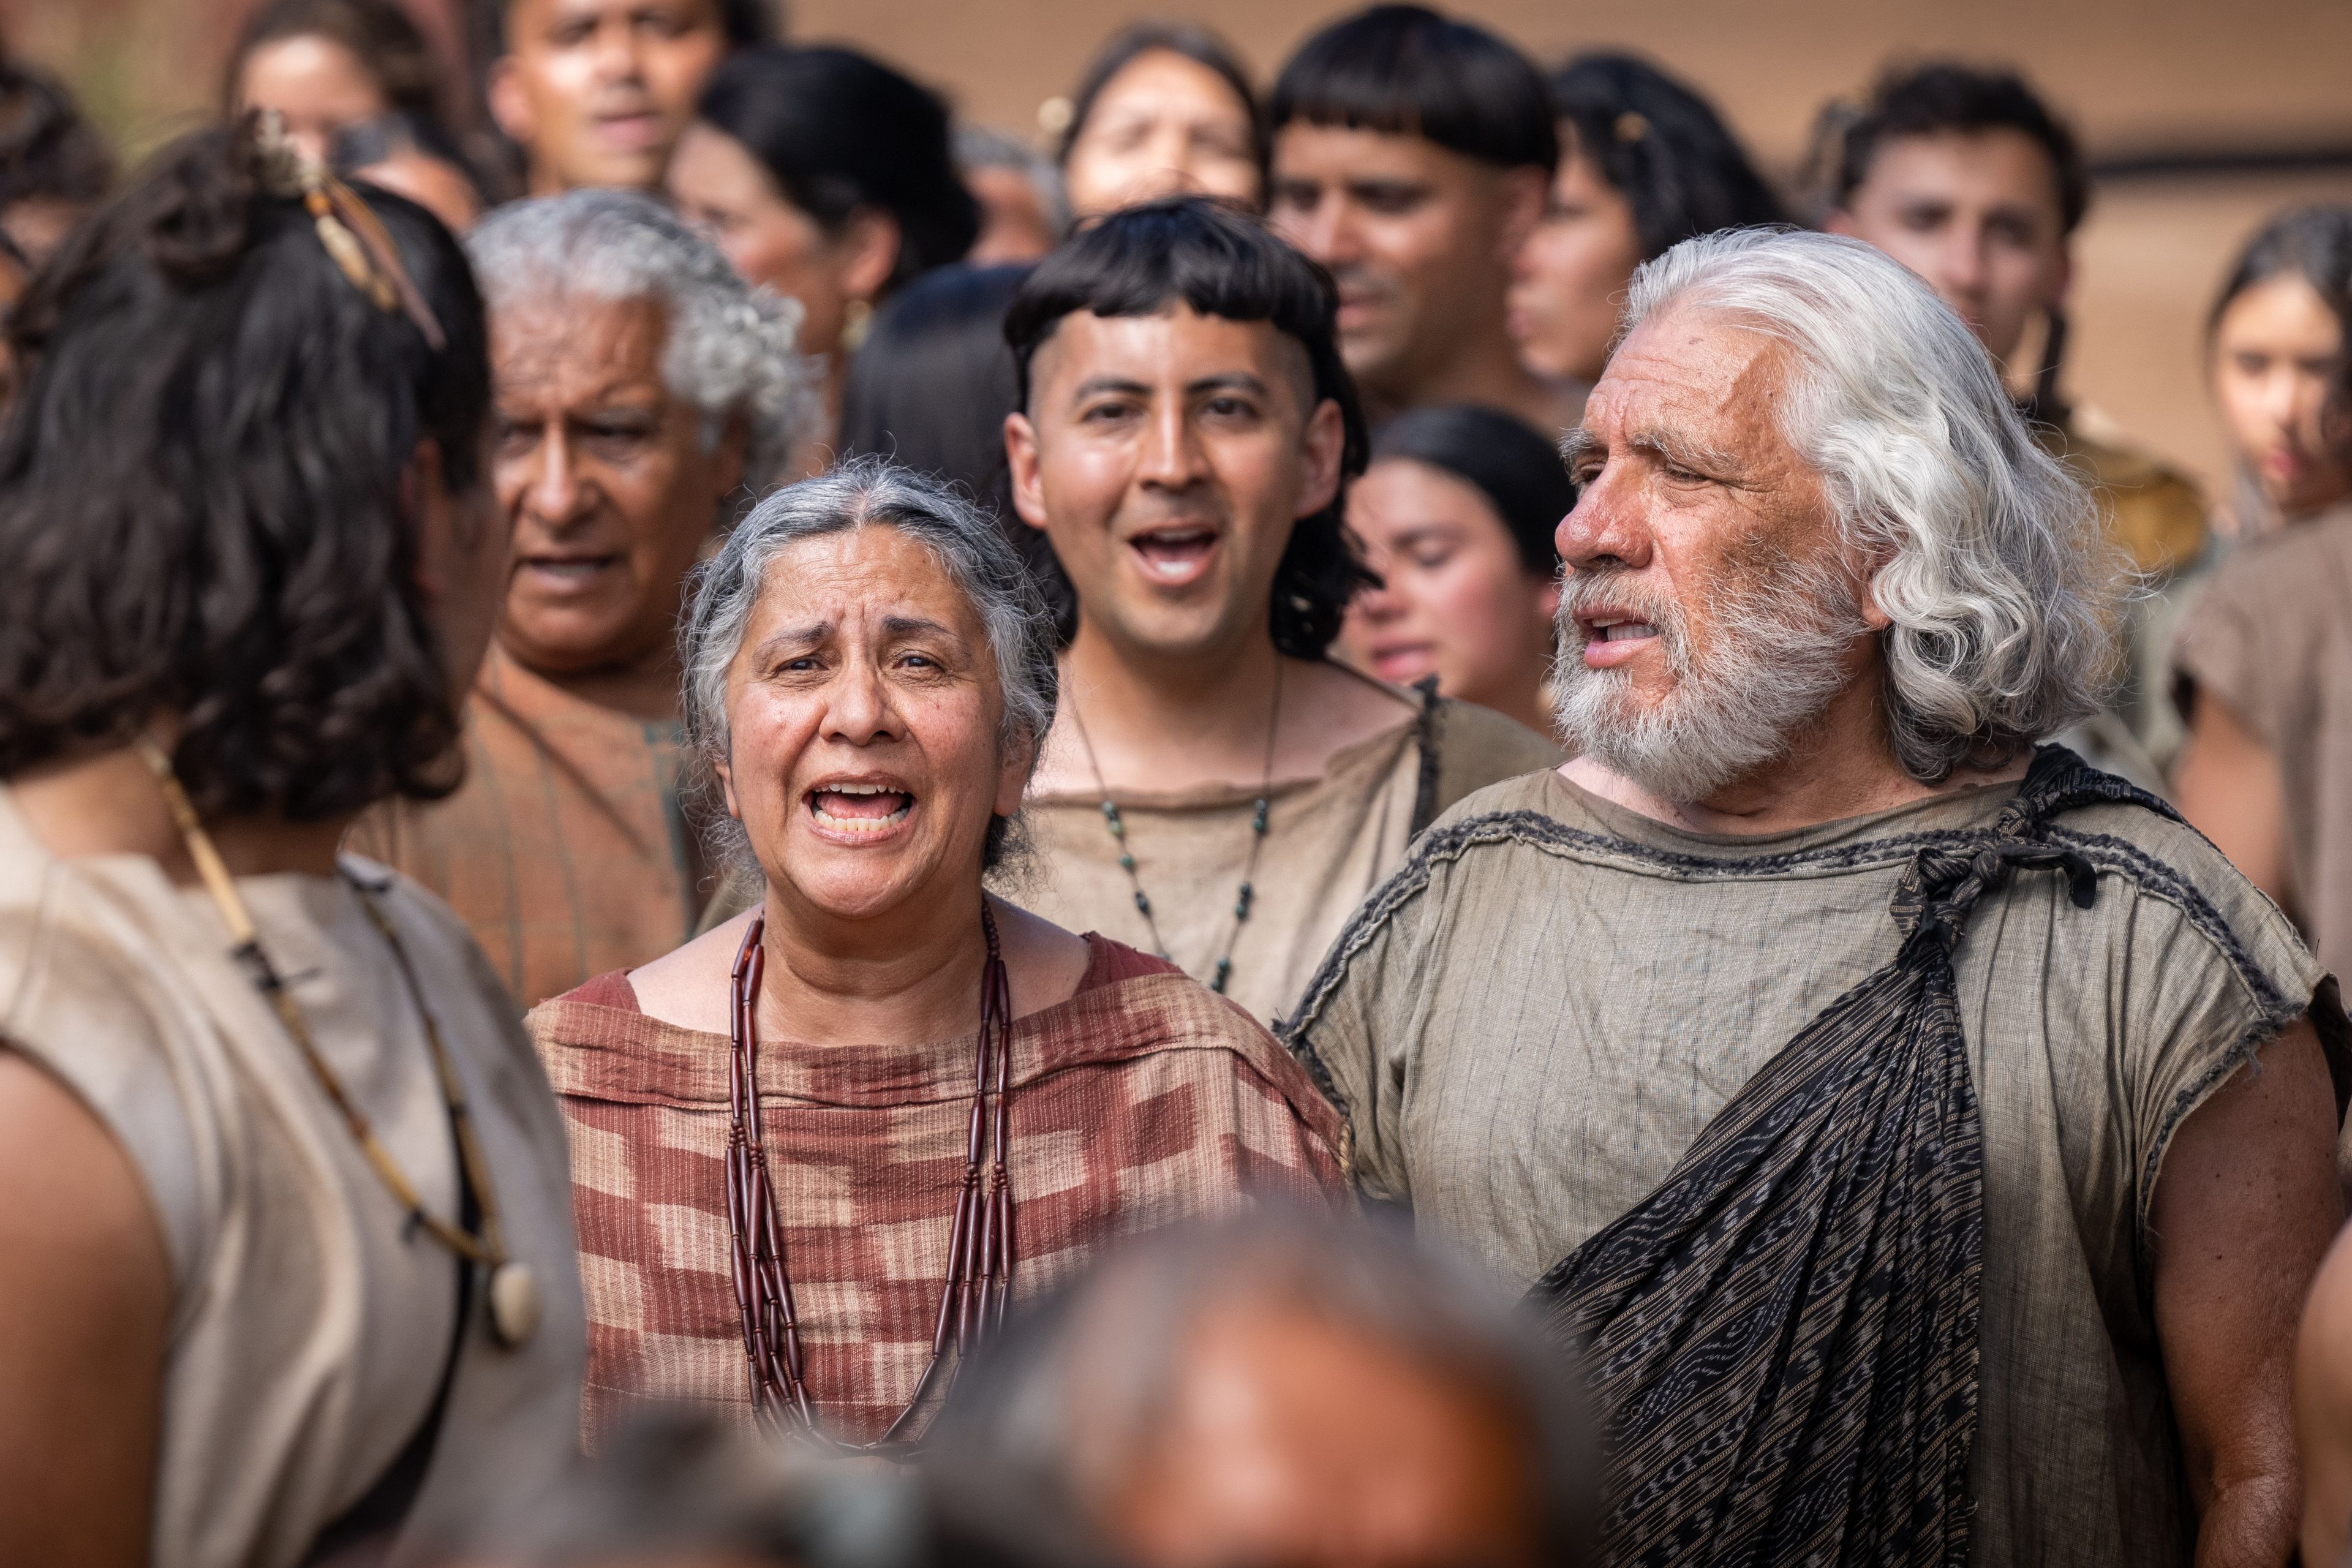 The multitude shouts hosanna to the Lord as Nephites gather together in the City of Bountiful.